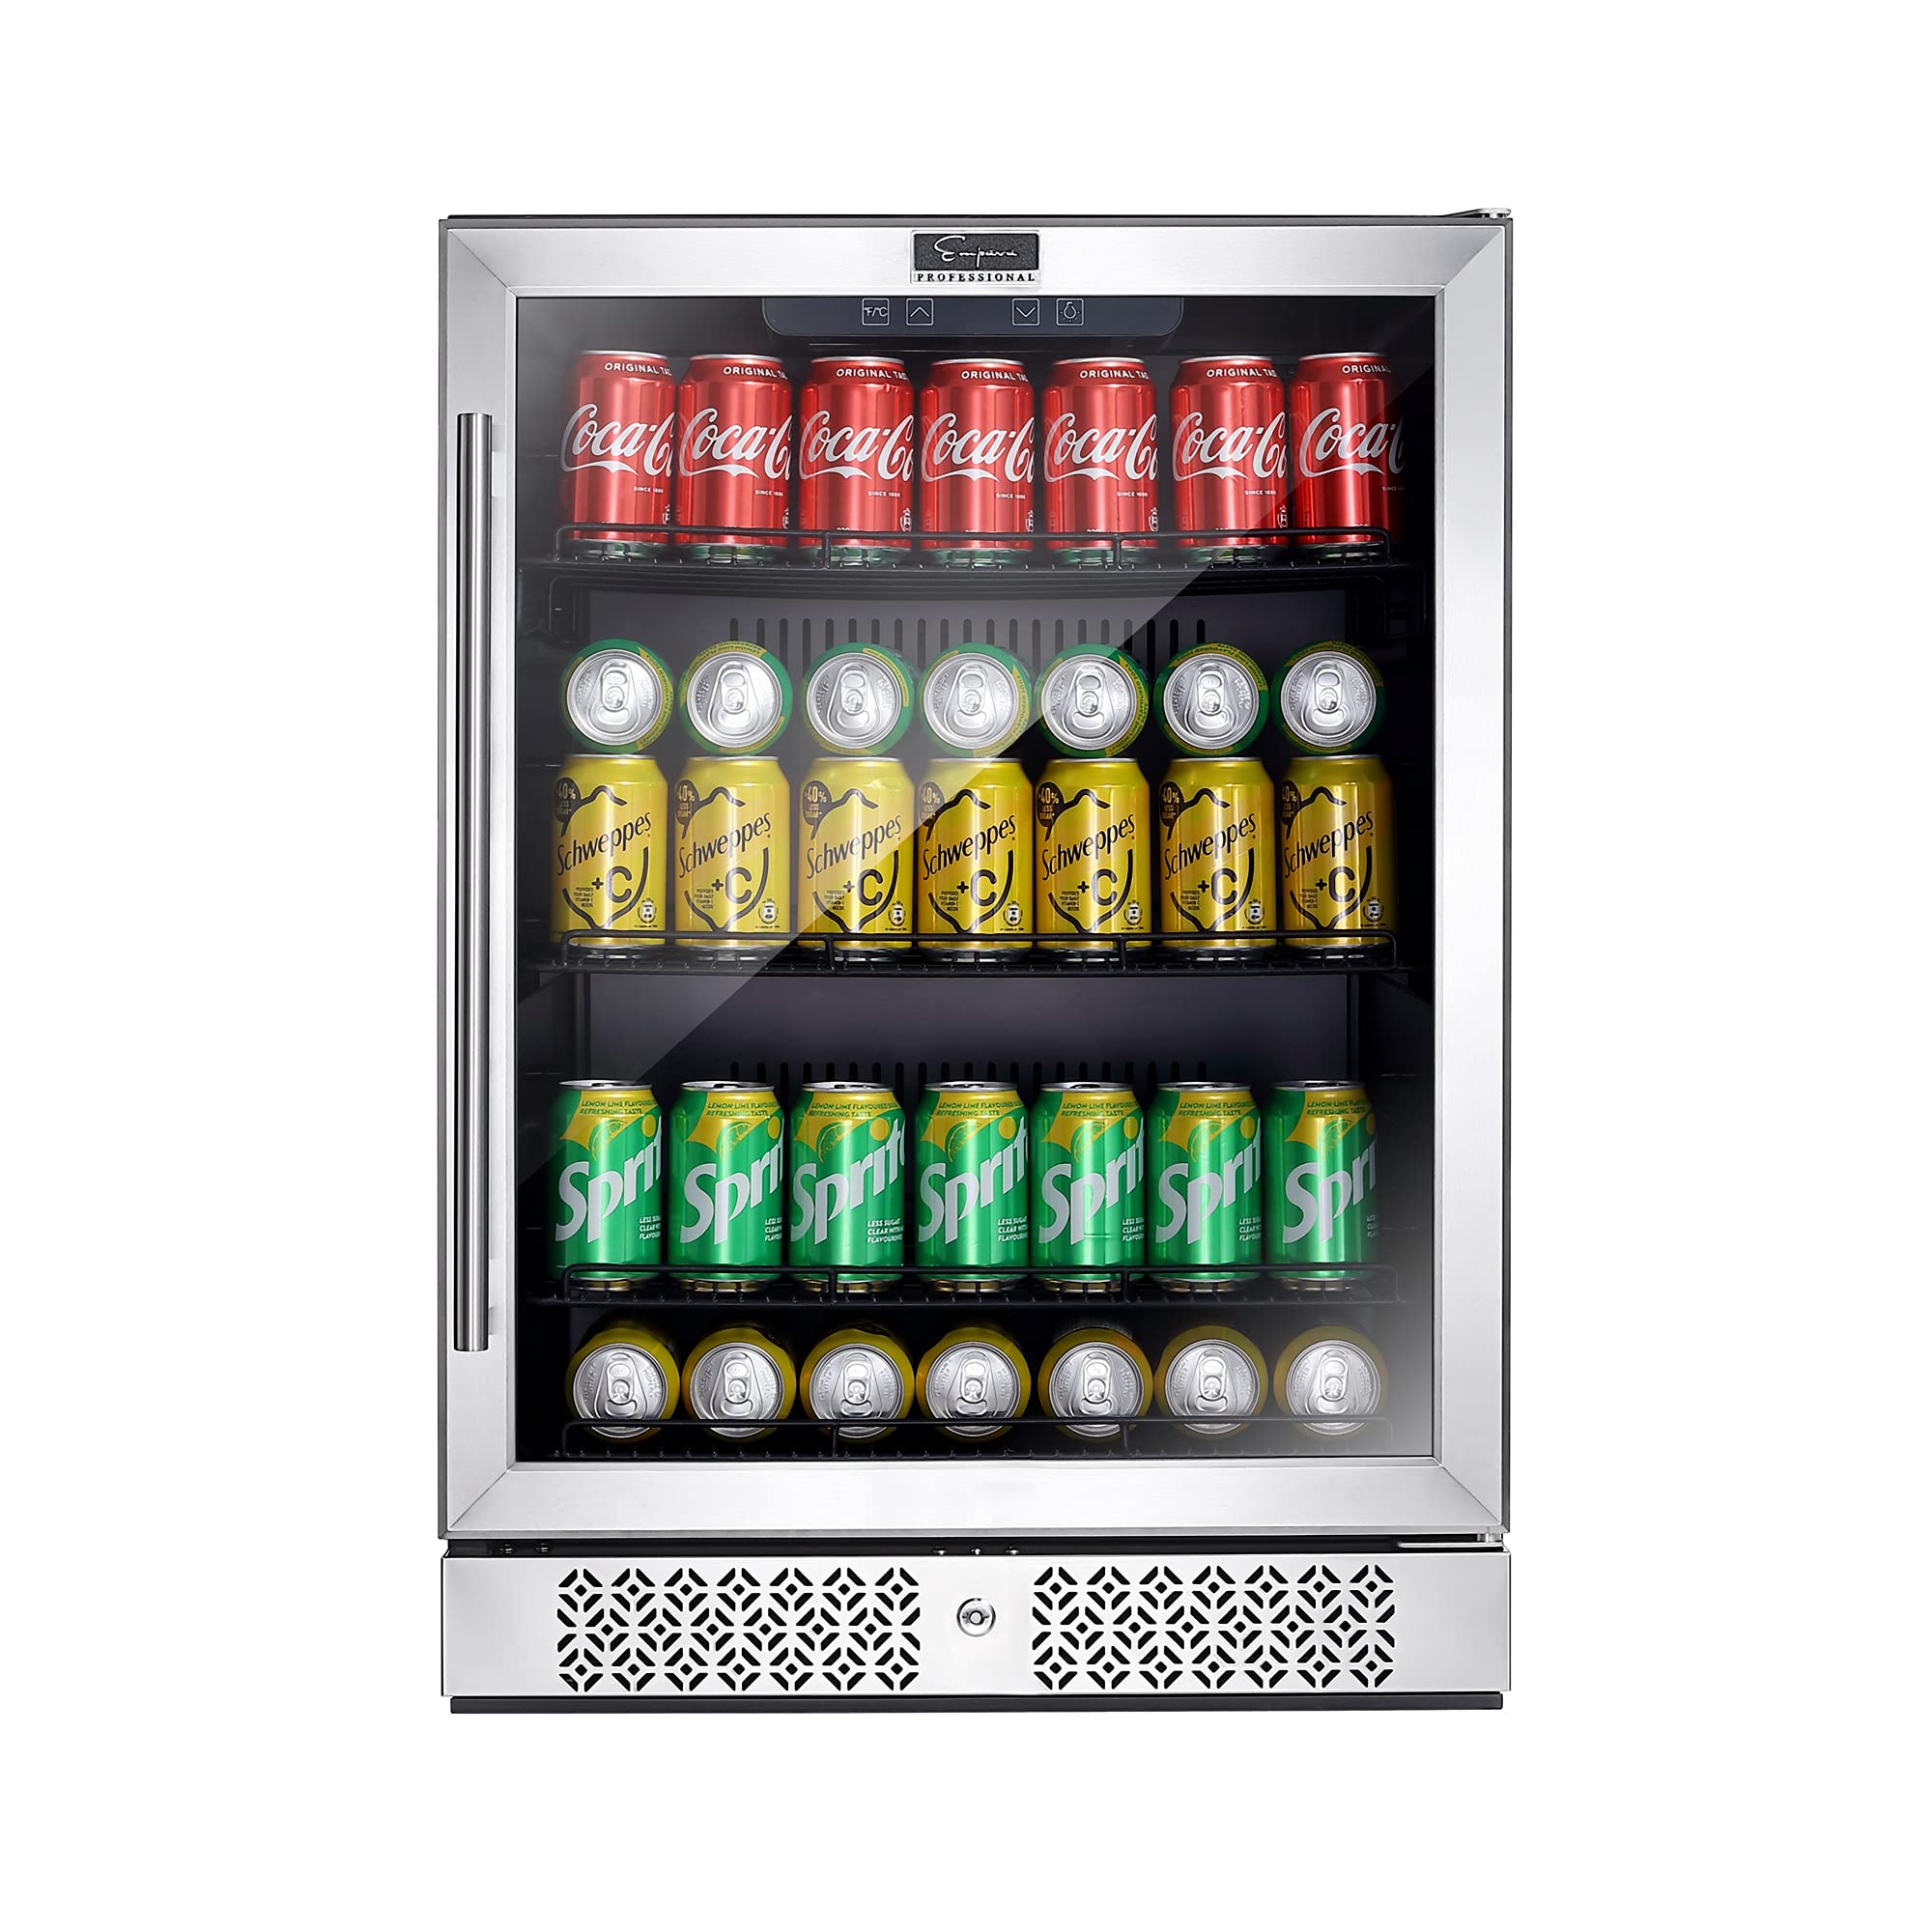 Empava EMPV-BR02S 140 Can Capacity Beverage, Mini Glass Door Built-in Counter or Freestanding Drink Fridge Cool Your Beer Soda to 37F for Kitchen, Bar or Office, 24 Inch, Stainless Steel